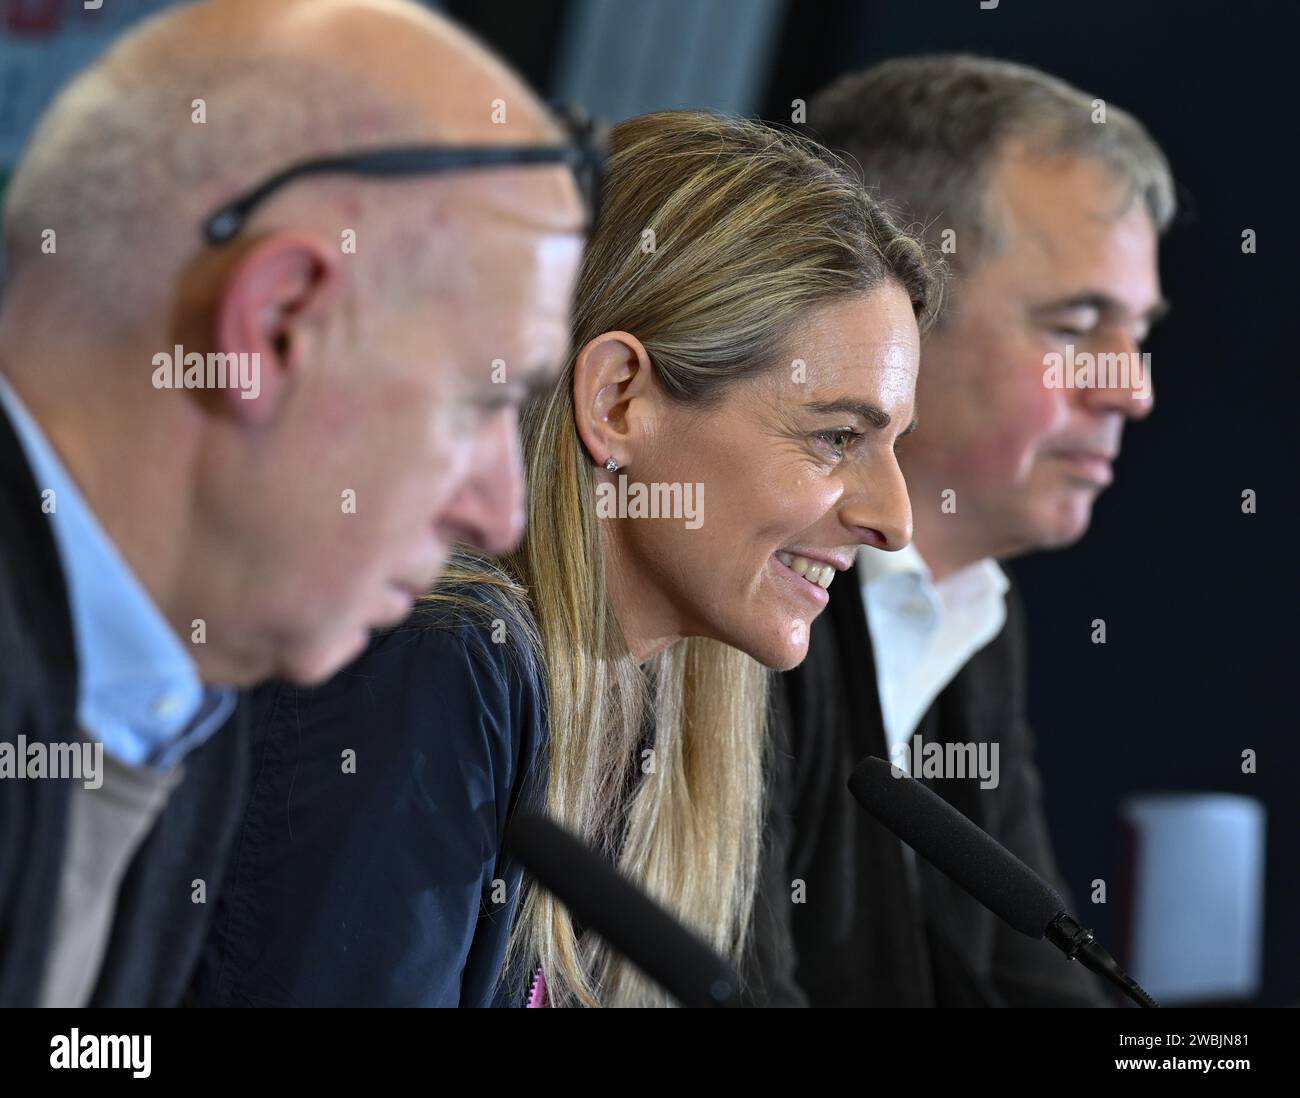 11 January 2024, Hesse, Frankfurt/Main: Nia Künzer (M), new DFB Sports Director for Women's Football, Bernd Neuendorf (l), President of the German Football Association (DFB), and Andreas Rettig, DFB Managing Director Sport, take part in a press conference at the DFB Campus. The 43-year-old former national team player from Wetzlar took up the newly created post on January 1. Photo: Arne Dedert/dpa Stock Photo